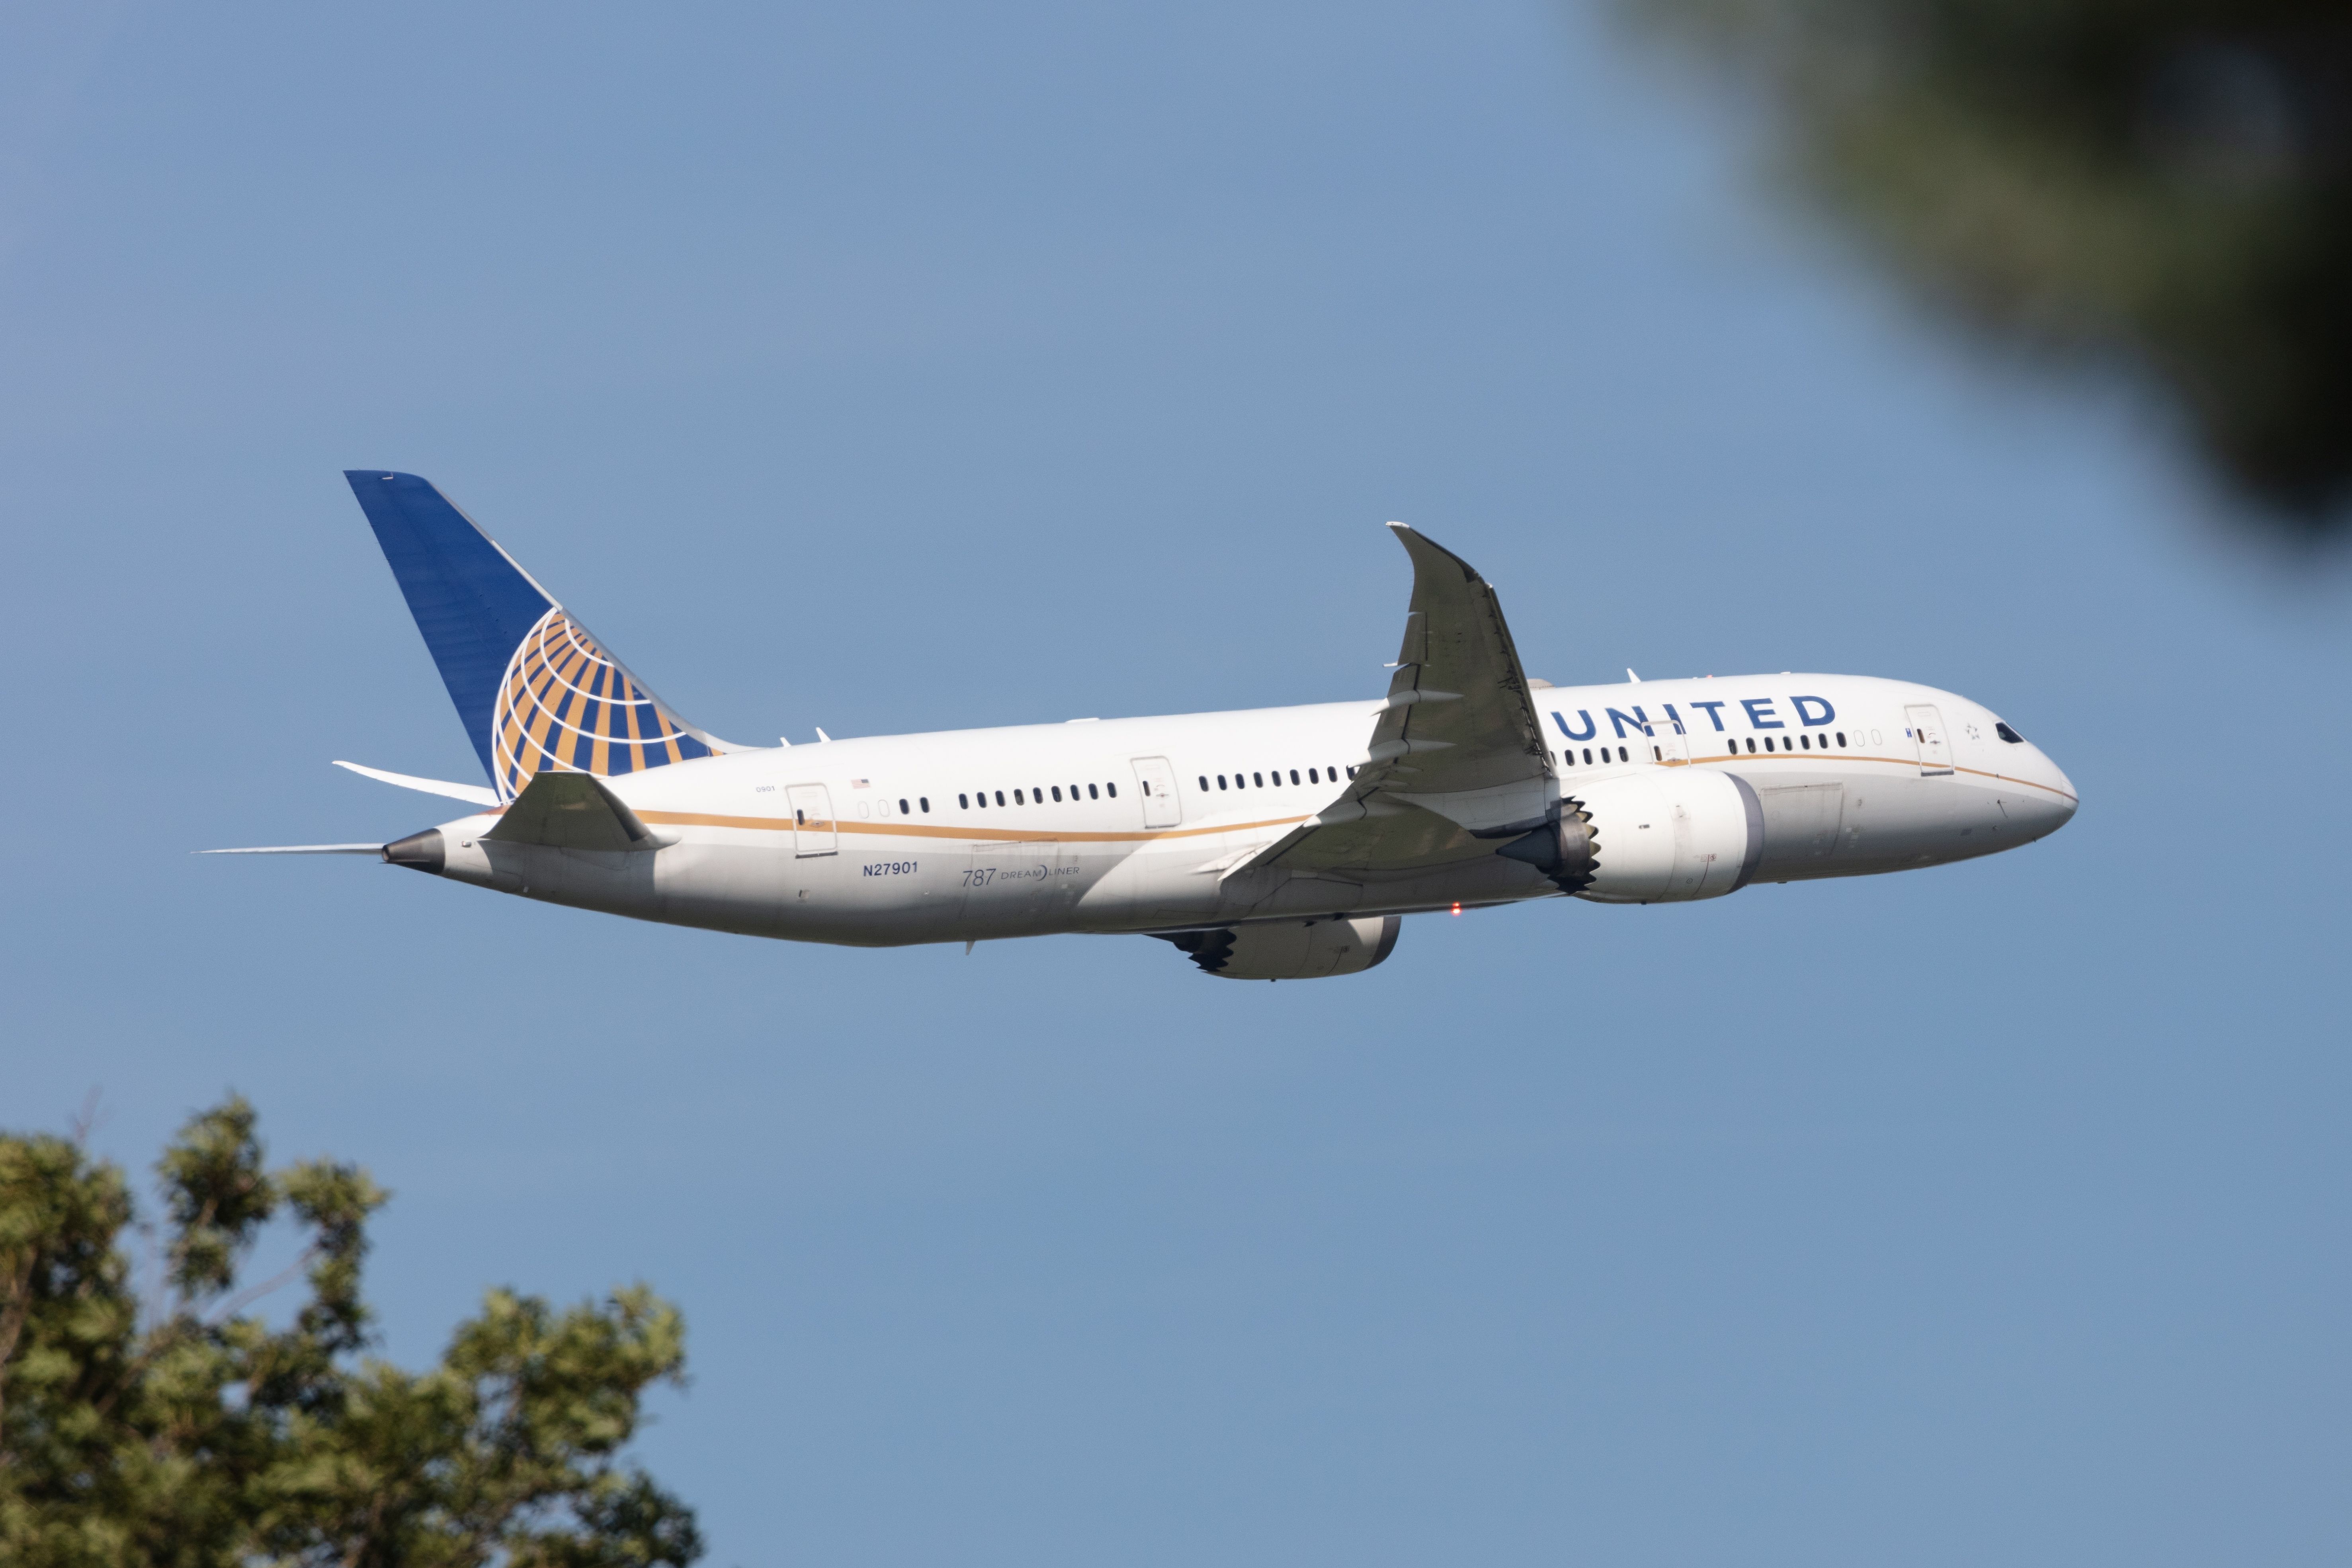 United Airlines Boeing 787-8 Dreamliner departing from Amsterdam Schiphol Airport.